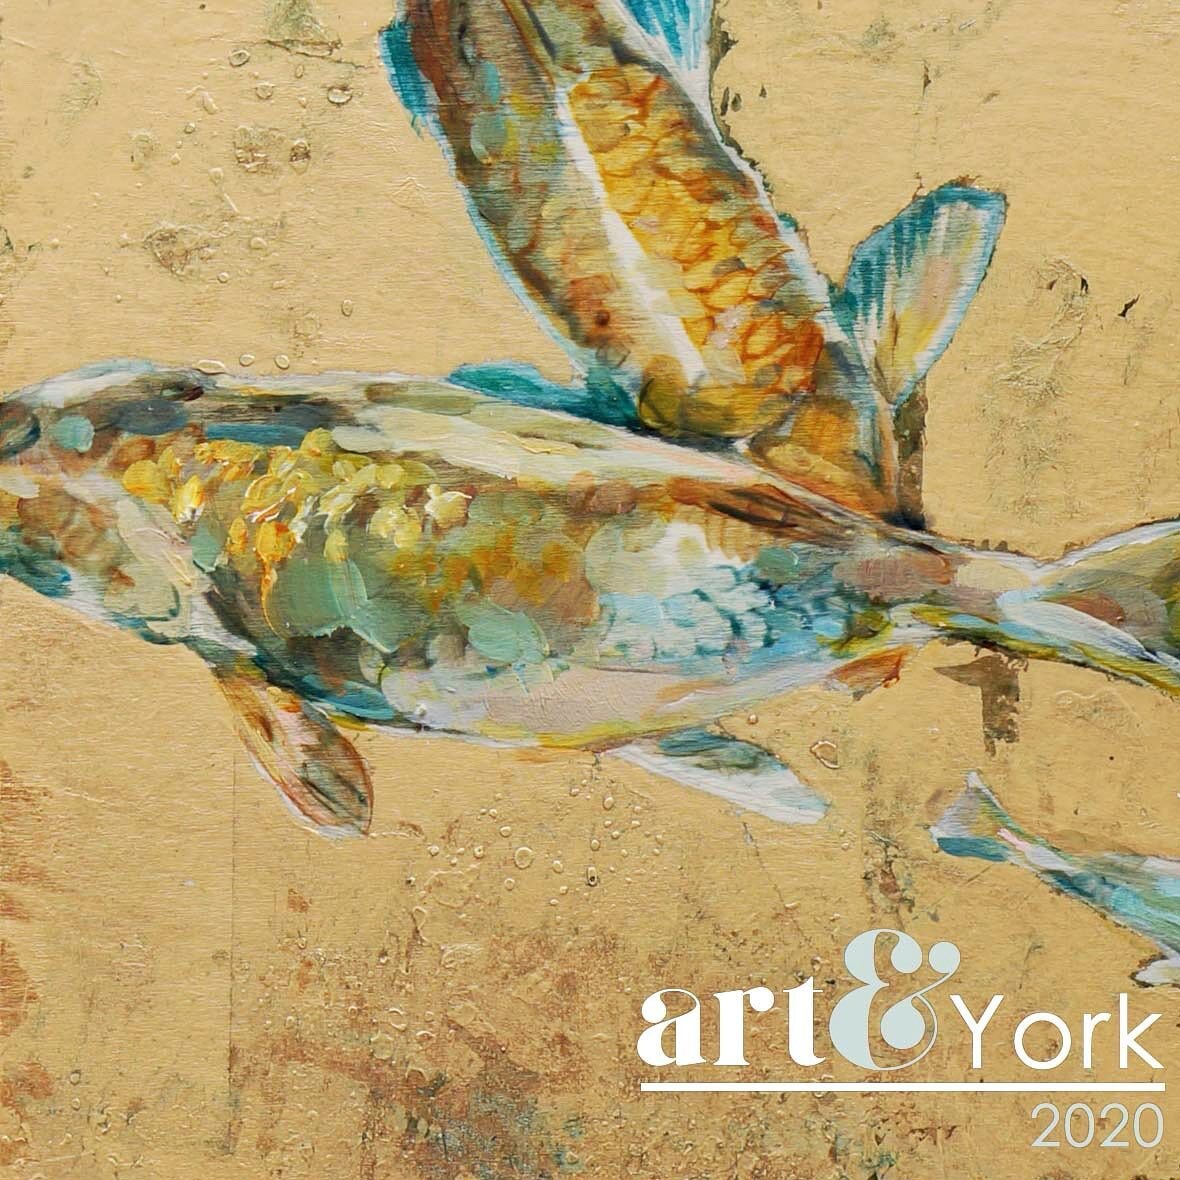 Tickets have gone on sale for @art.and.york Please see their website for details. Friday 23rd, Saturday 24th and Sunday 25th of October at the Knavesmire in York. There is a phenomenal range of artists and makers exhibiting, from ceramics to jeweller